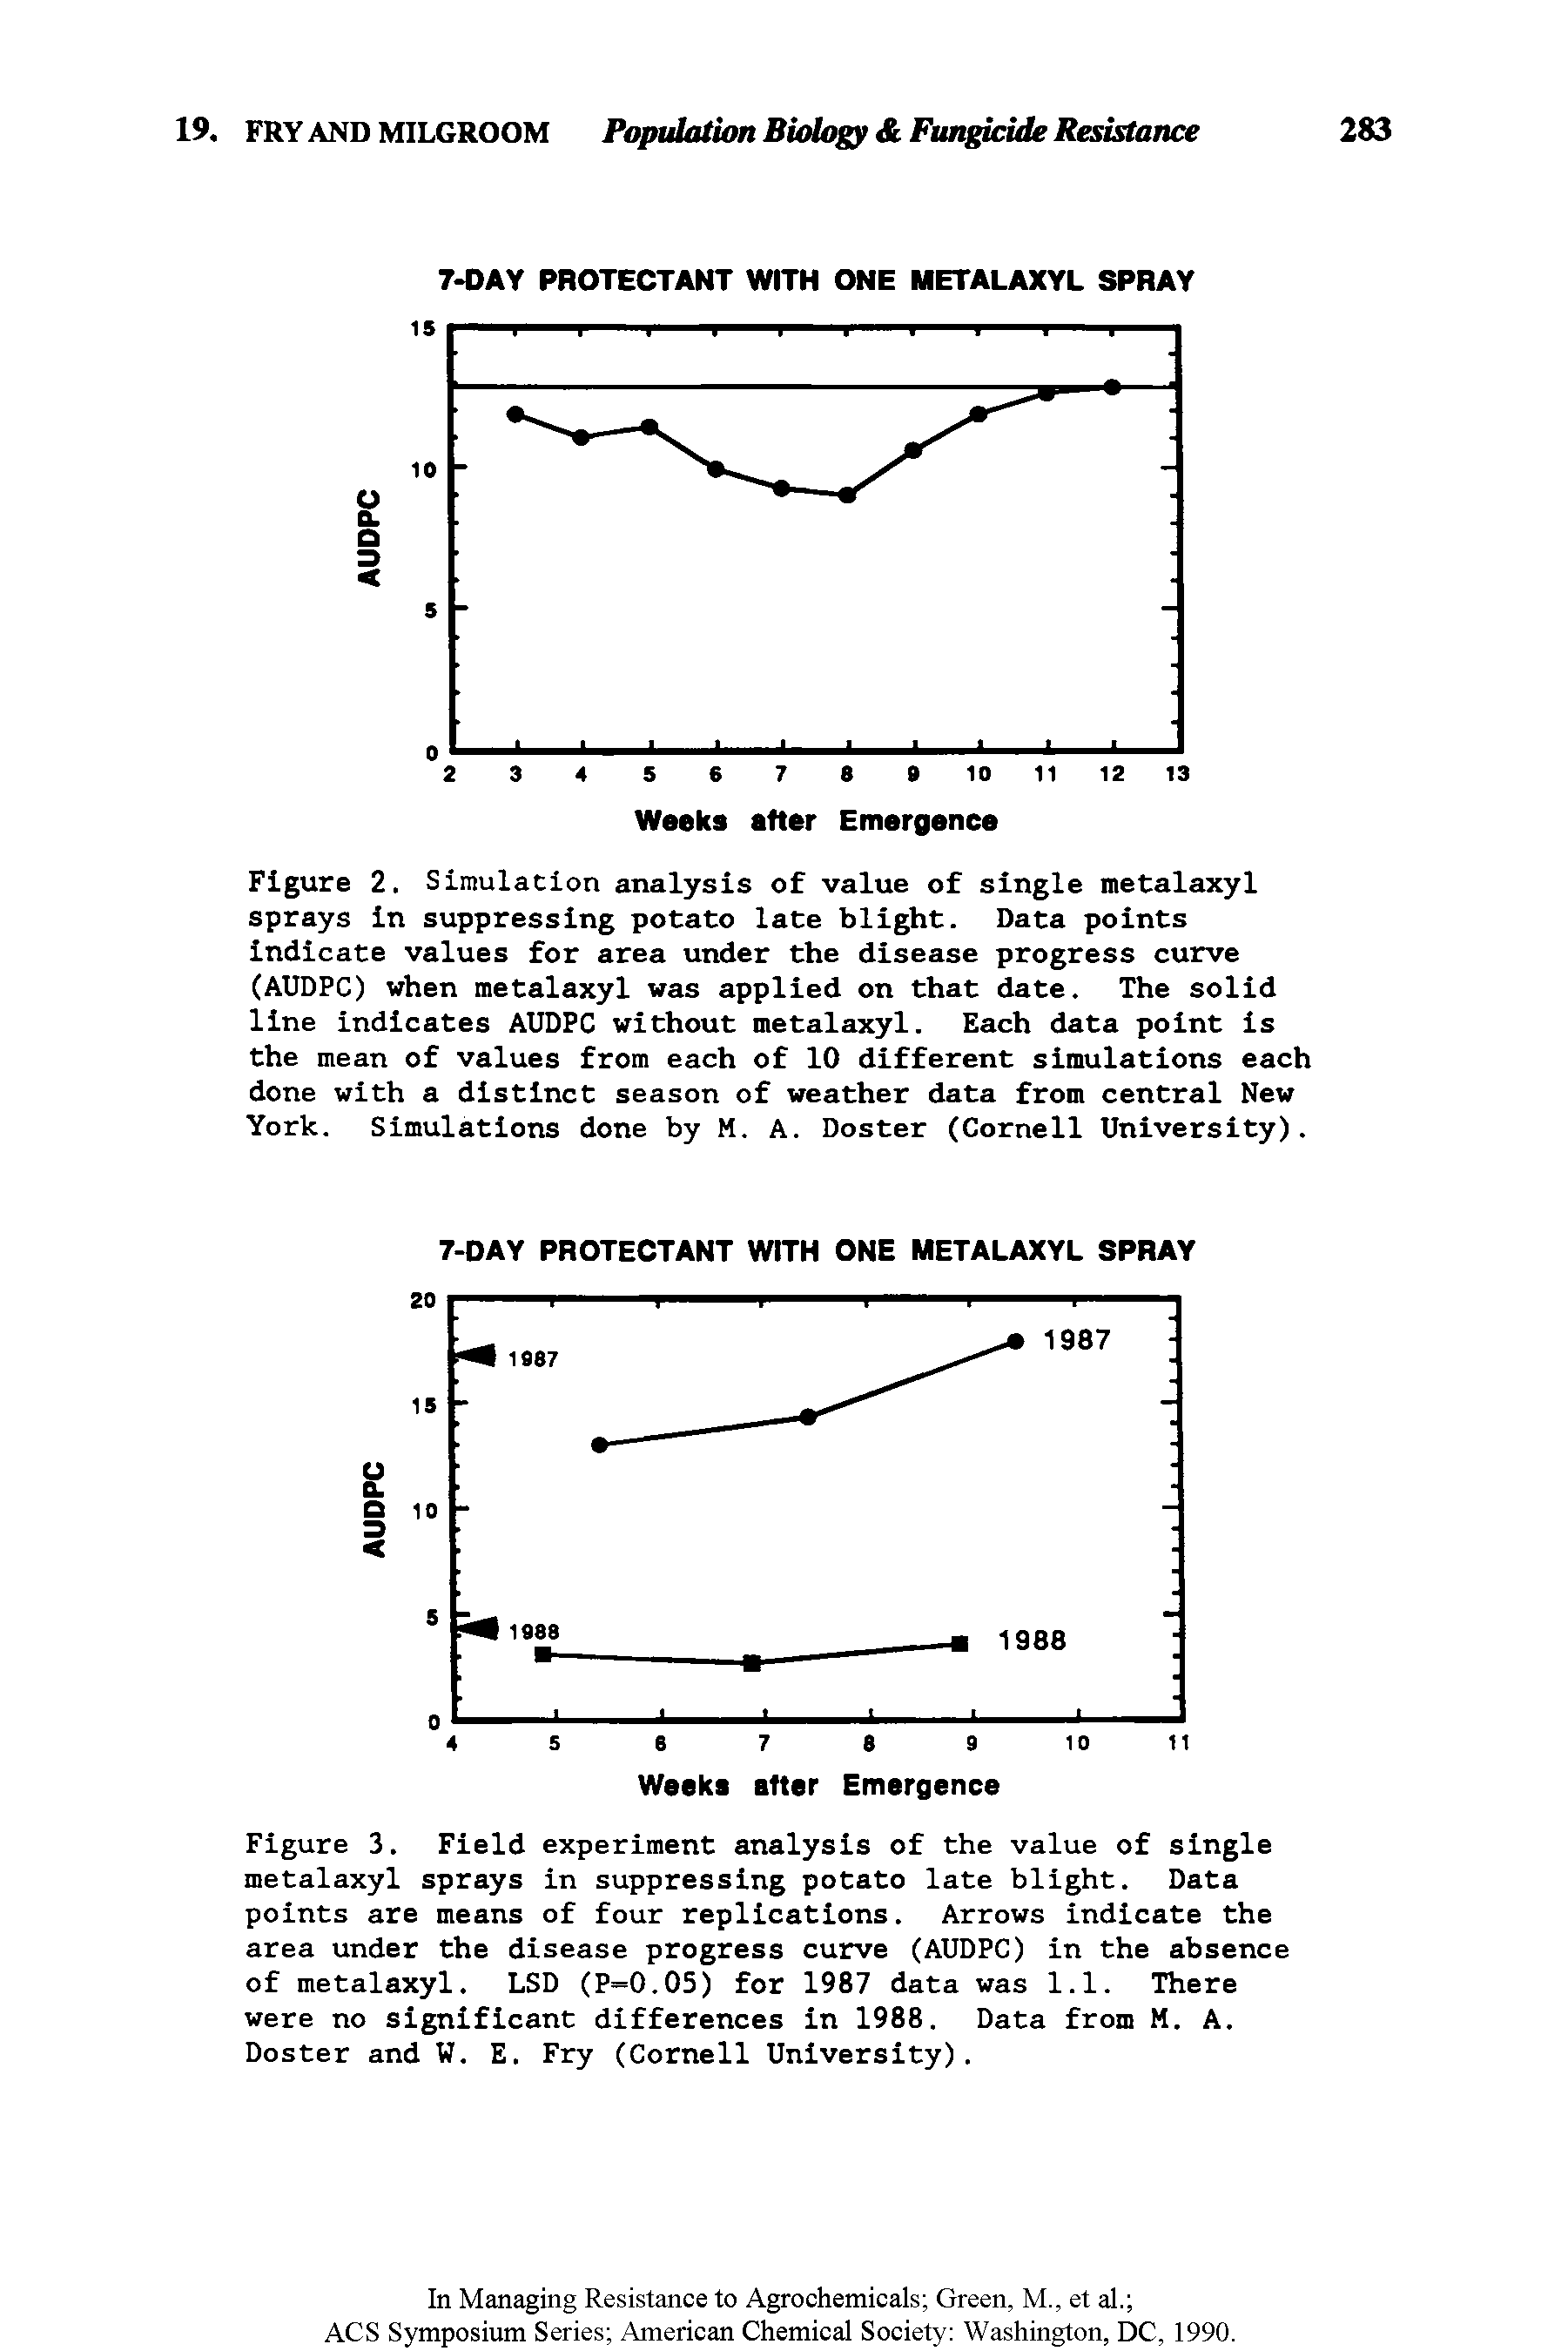 Figure 3. Field experiment analysis of the value of single metalaxyl sprays in suppressing potato late blight. Data points are means of four replications. Arrows indicate the area under the disease progress curve (AUDPC) in the absence of metalaxyl. LSD (P=0.05) for 1987 data was 1.1. There were no significant differences in 1988. Data from M. A. Doster and W. E. Fry (Cornell University).